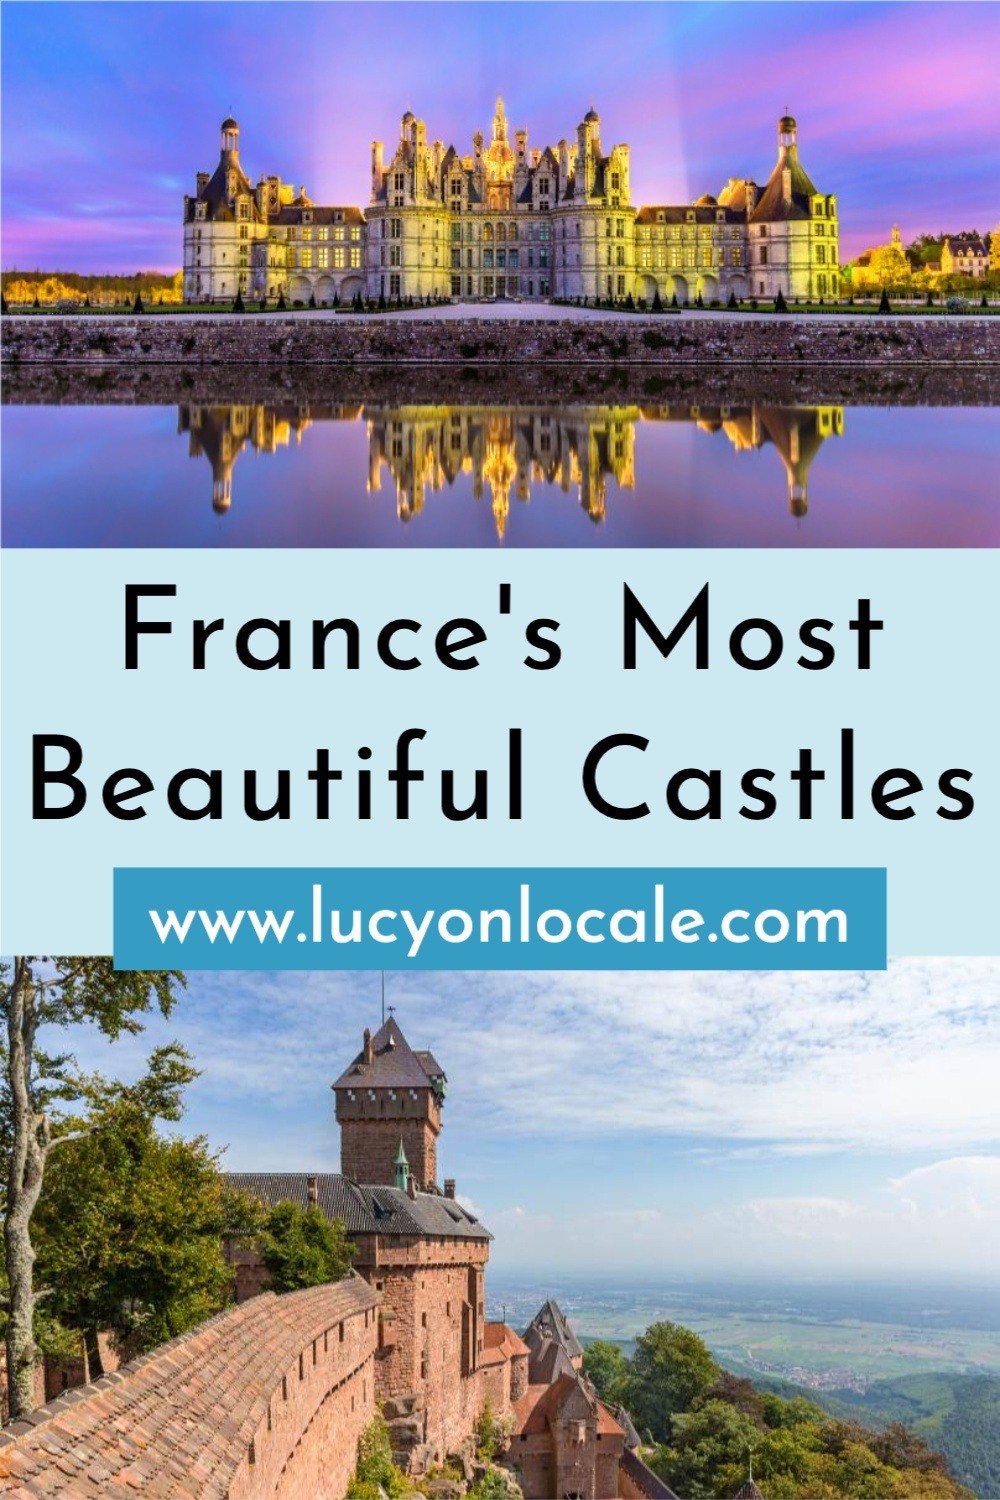 The most beautiful castles in France